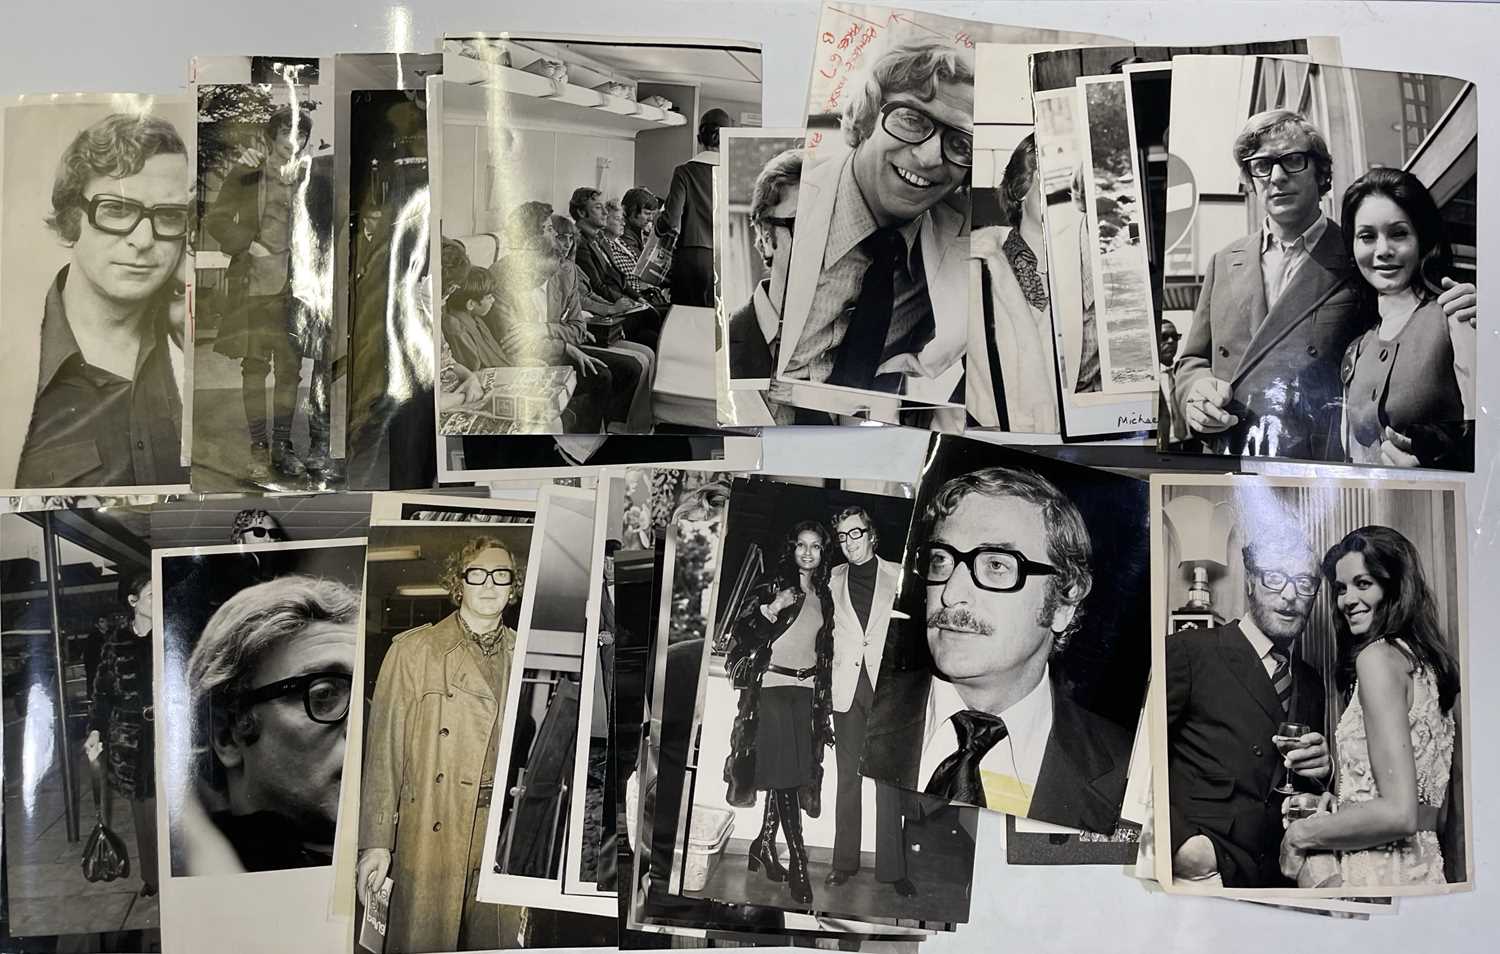 MICHAEL CAINE - LARGE COLLECTION OF PRESS PHOTOGRAPHS. - Image 3 of 3